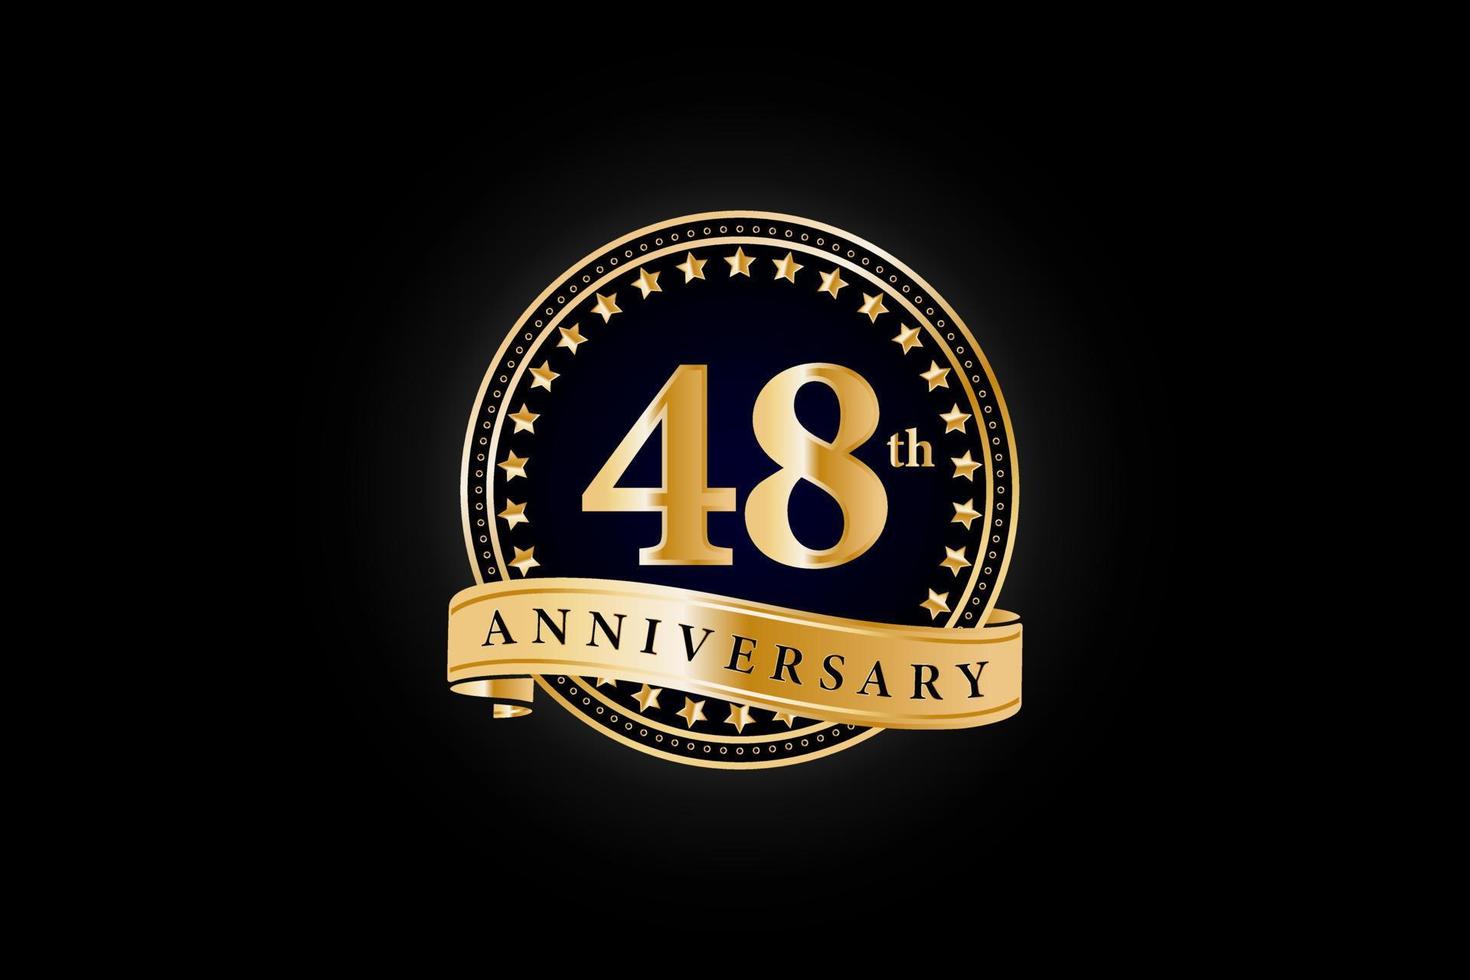 48th Anniversary golden gold logo with ring and gold ribbon isolated on black background, vector design for celebration.